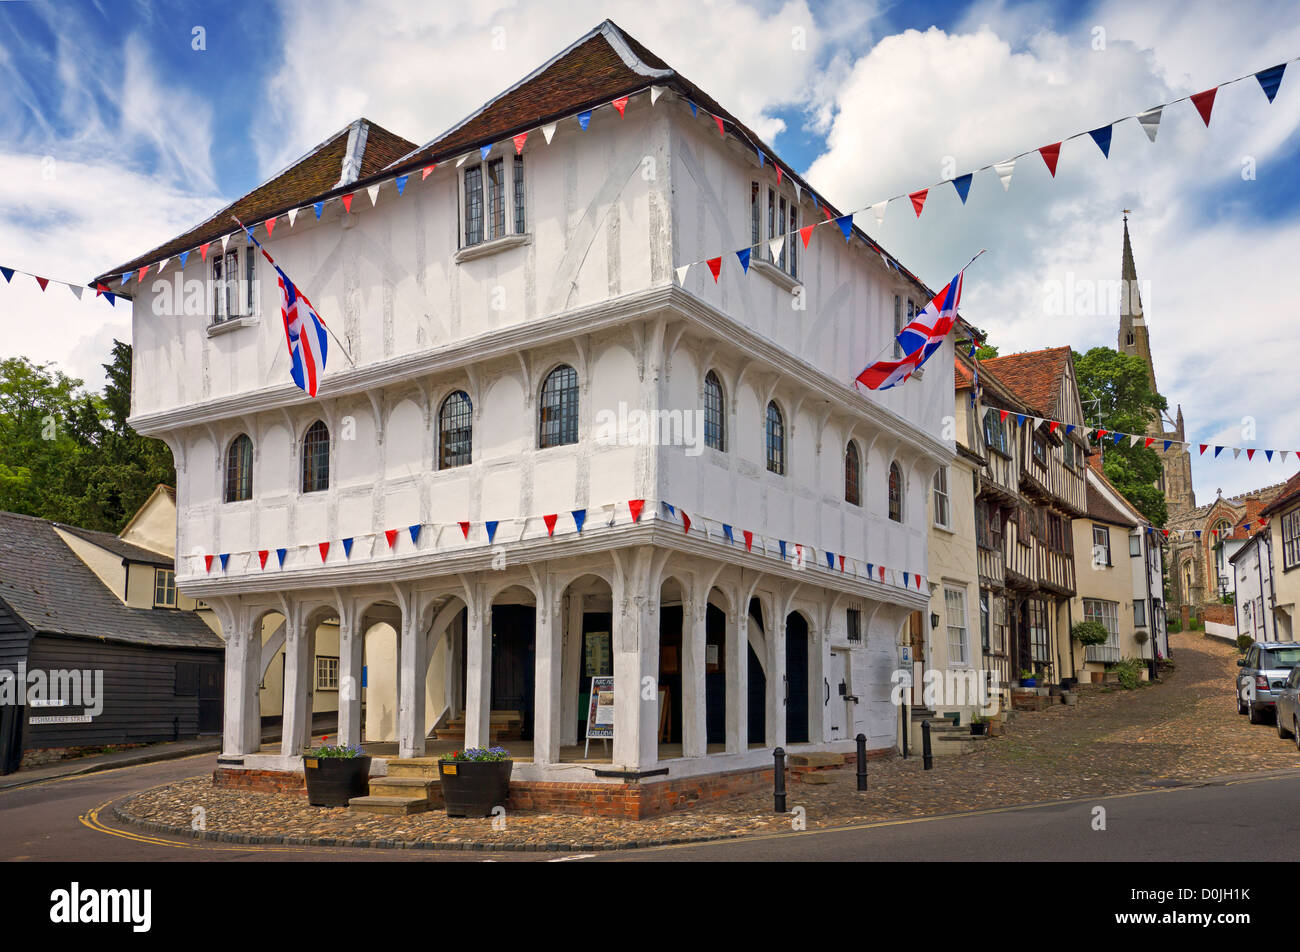 The 15th Century Guildhall in Thaxted decorated with bunting. Stock Photo